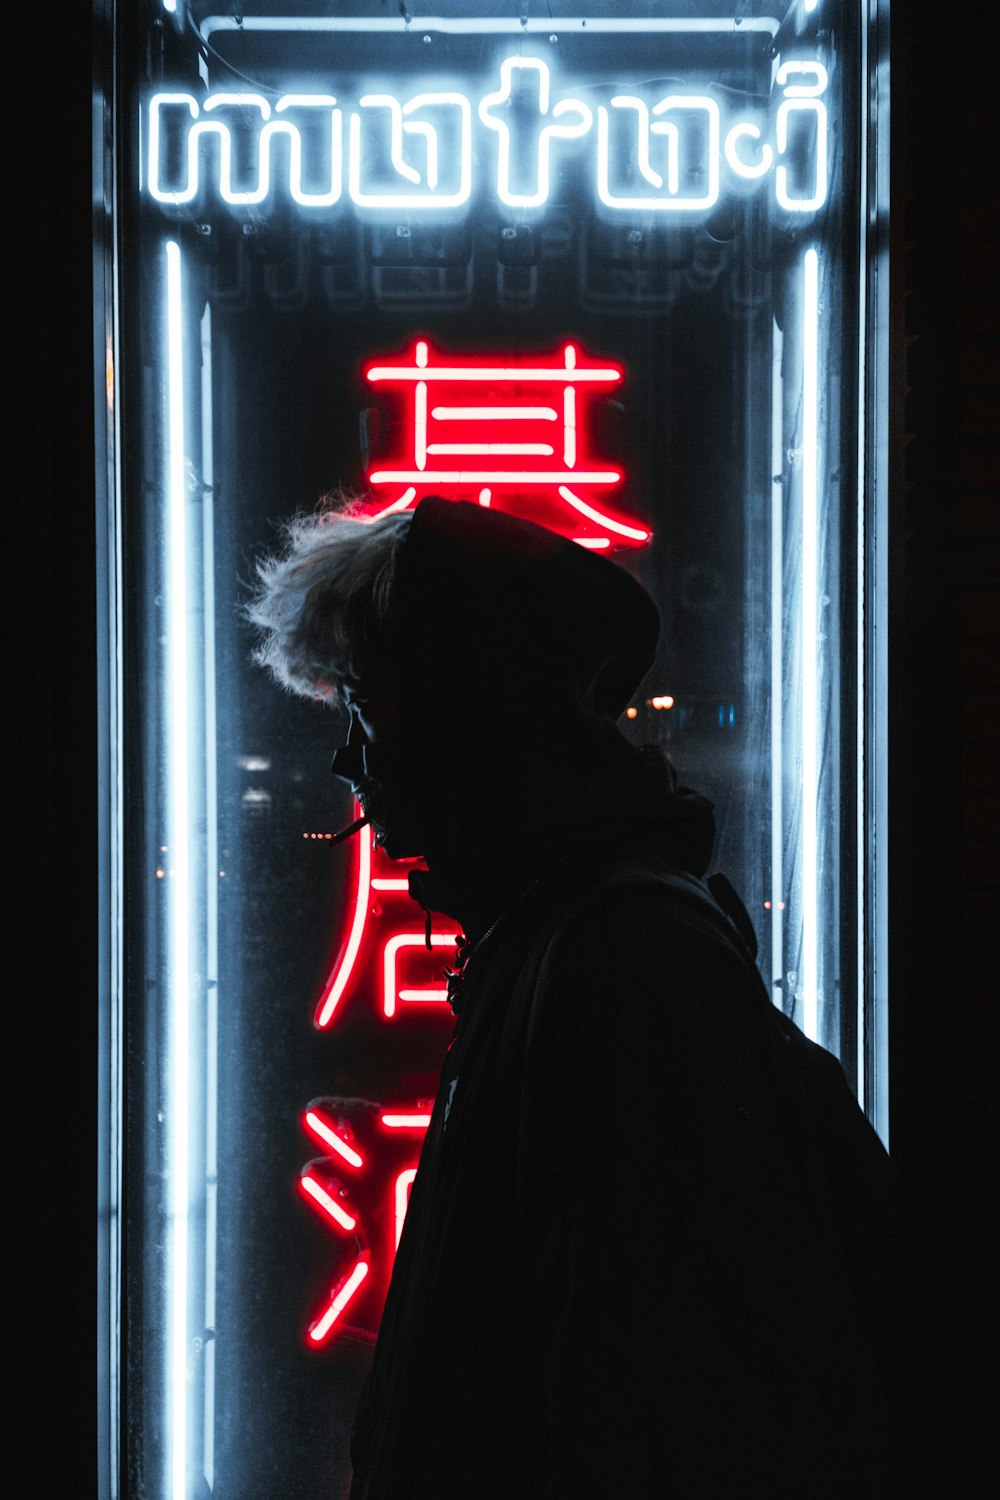 silhouette of person standing in front of neon sign